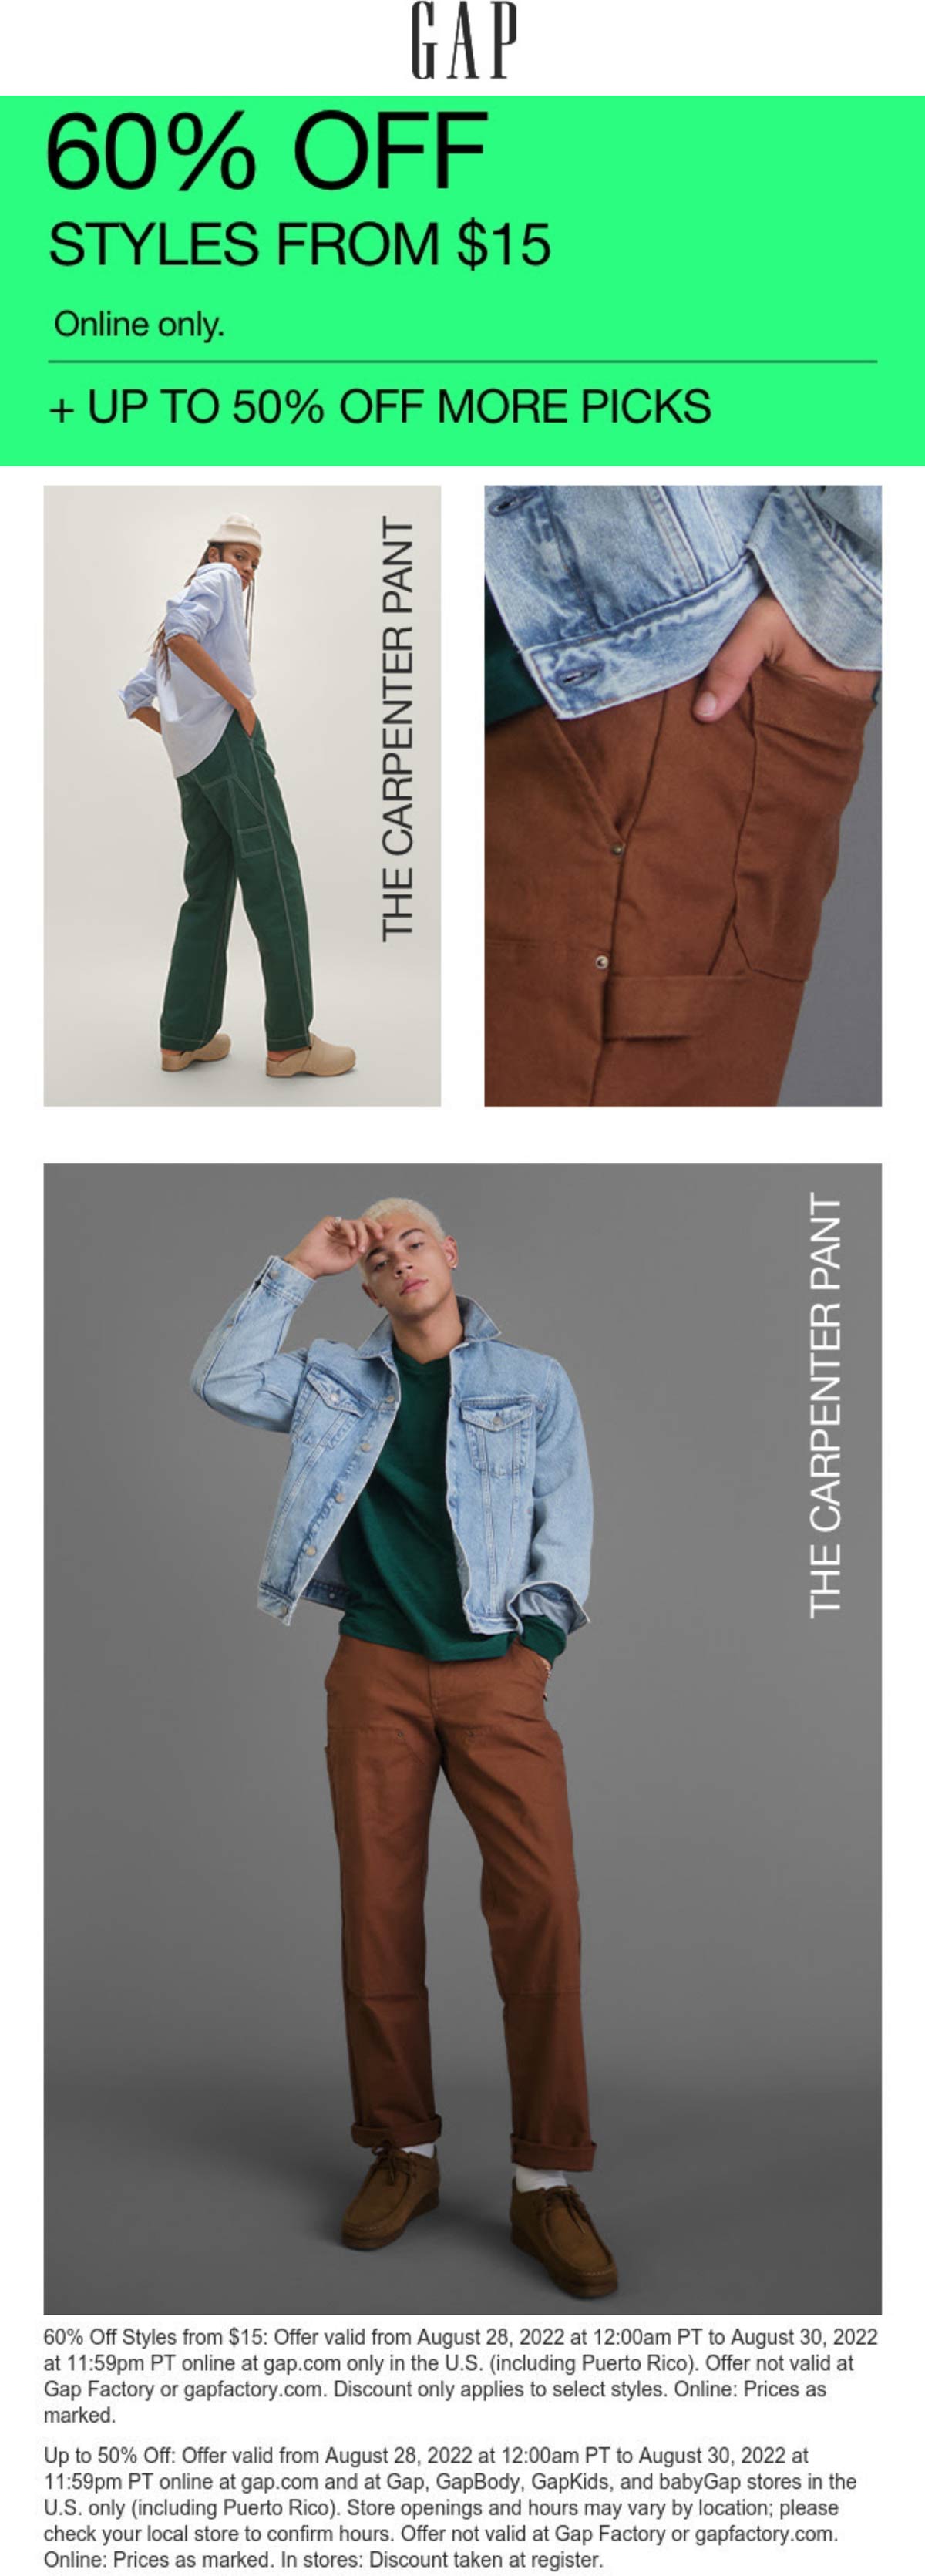 Gap stores Coupon  $15 styles are 60% off online at Gap #gap 